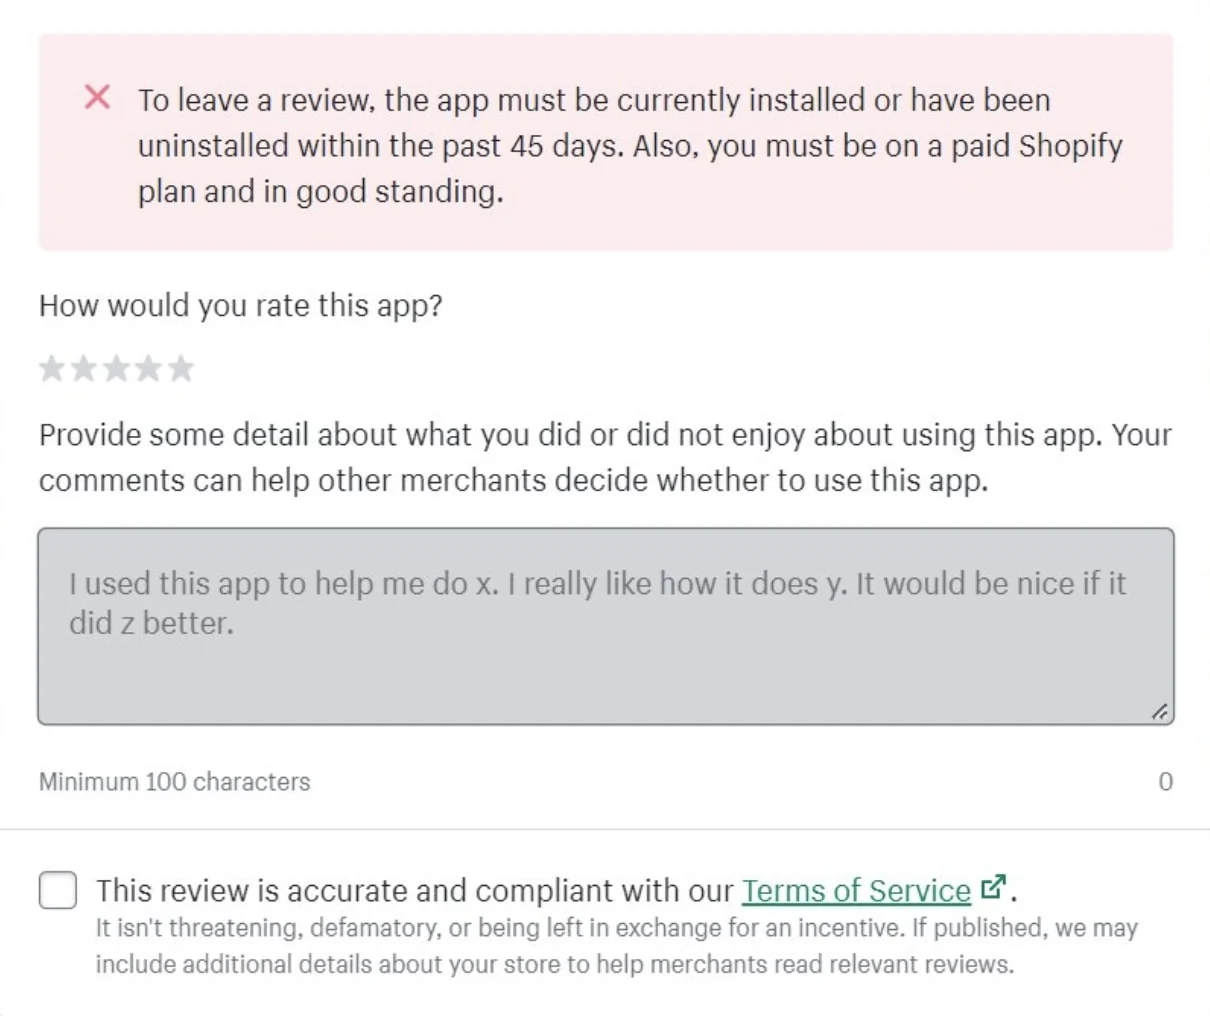 Rate the product using the star rating system, then write your review in the text box provided